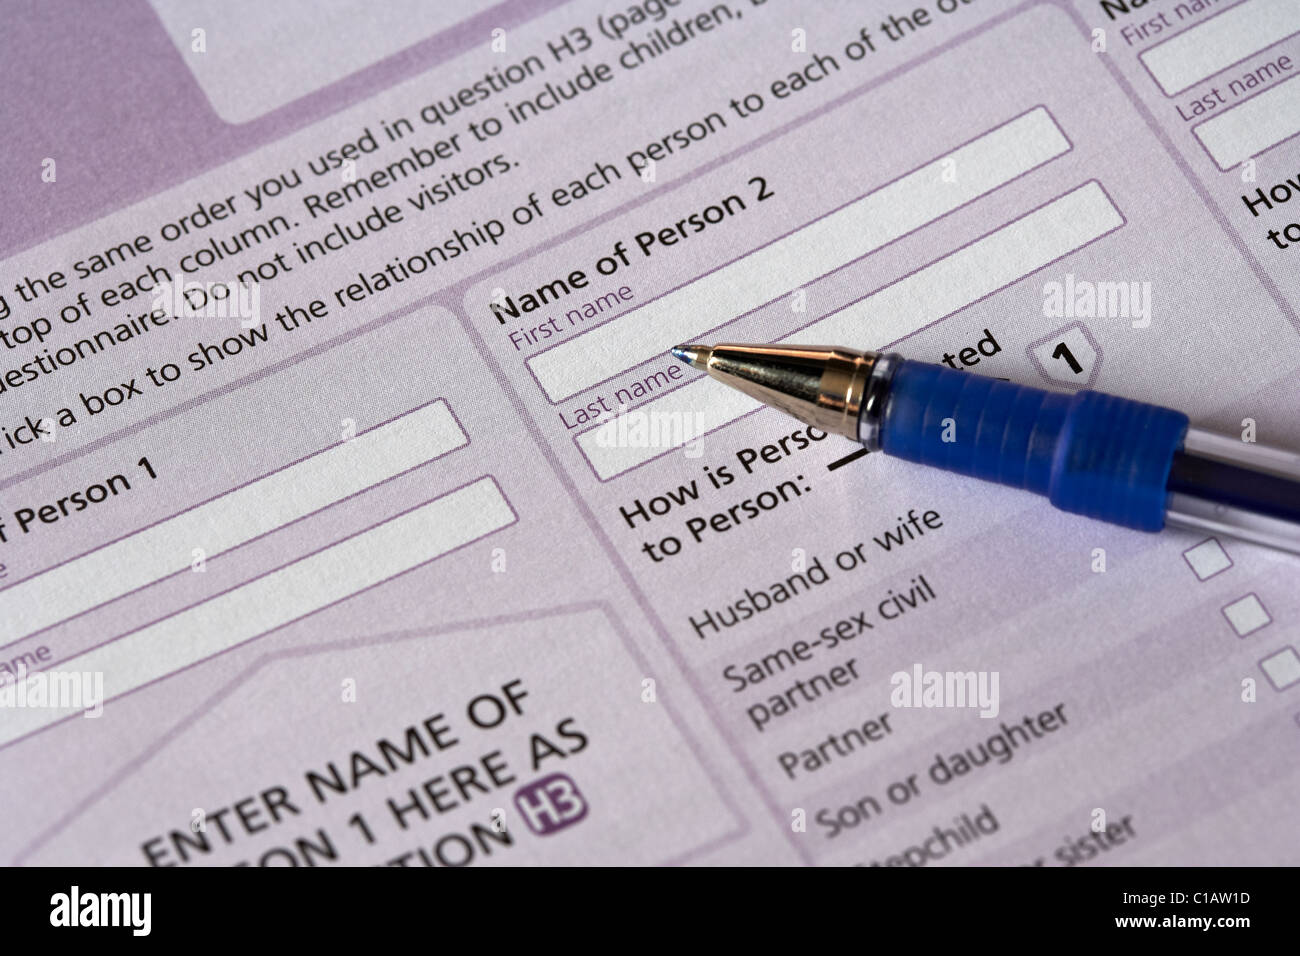 person 1 and 2 personal details question uk 2011 census forms as issued in Northern Ireland Stock Photo